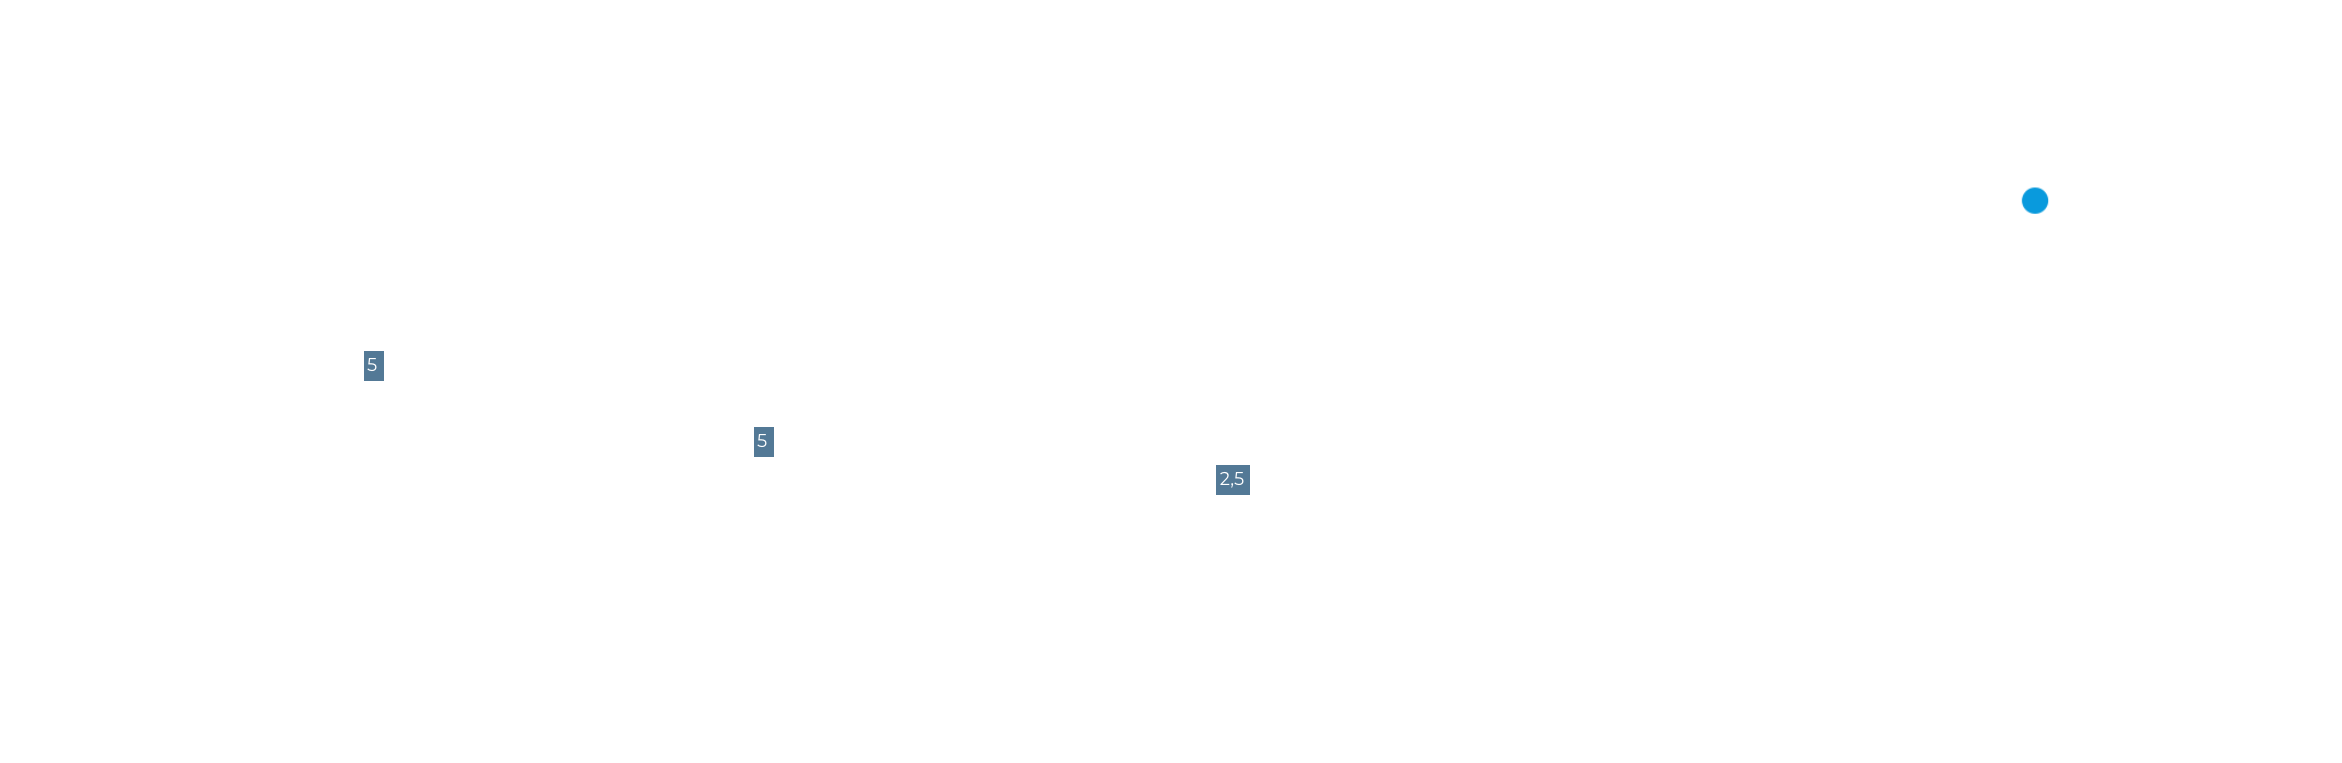 TIMELINE 1978 First & only bivalent (A,C) meningococcal vaccine; 1981 First & only quadrivalent meningococcal polysaccharide vaccine; 2005 First & only quadrivalent meningococcal conjugate vaccine liquid formulation; 2014 MenACWY vaccine licensed for 2nd dose; 2020
 MenQuadfi, protect expanded age group of individuals 2 years and older